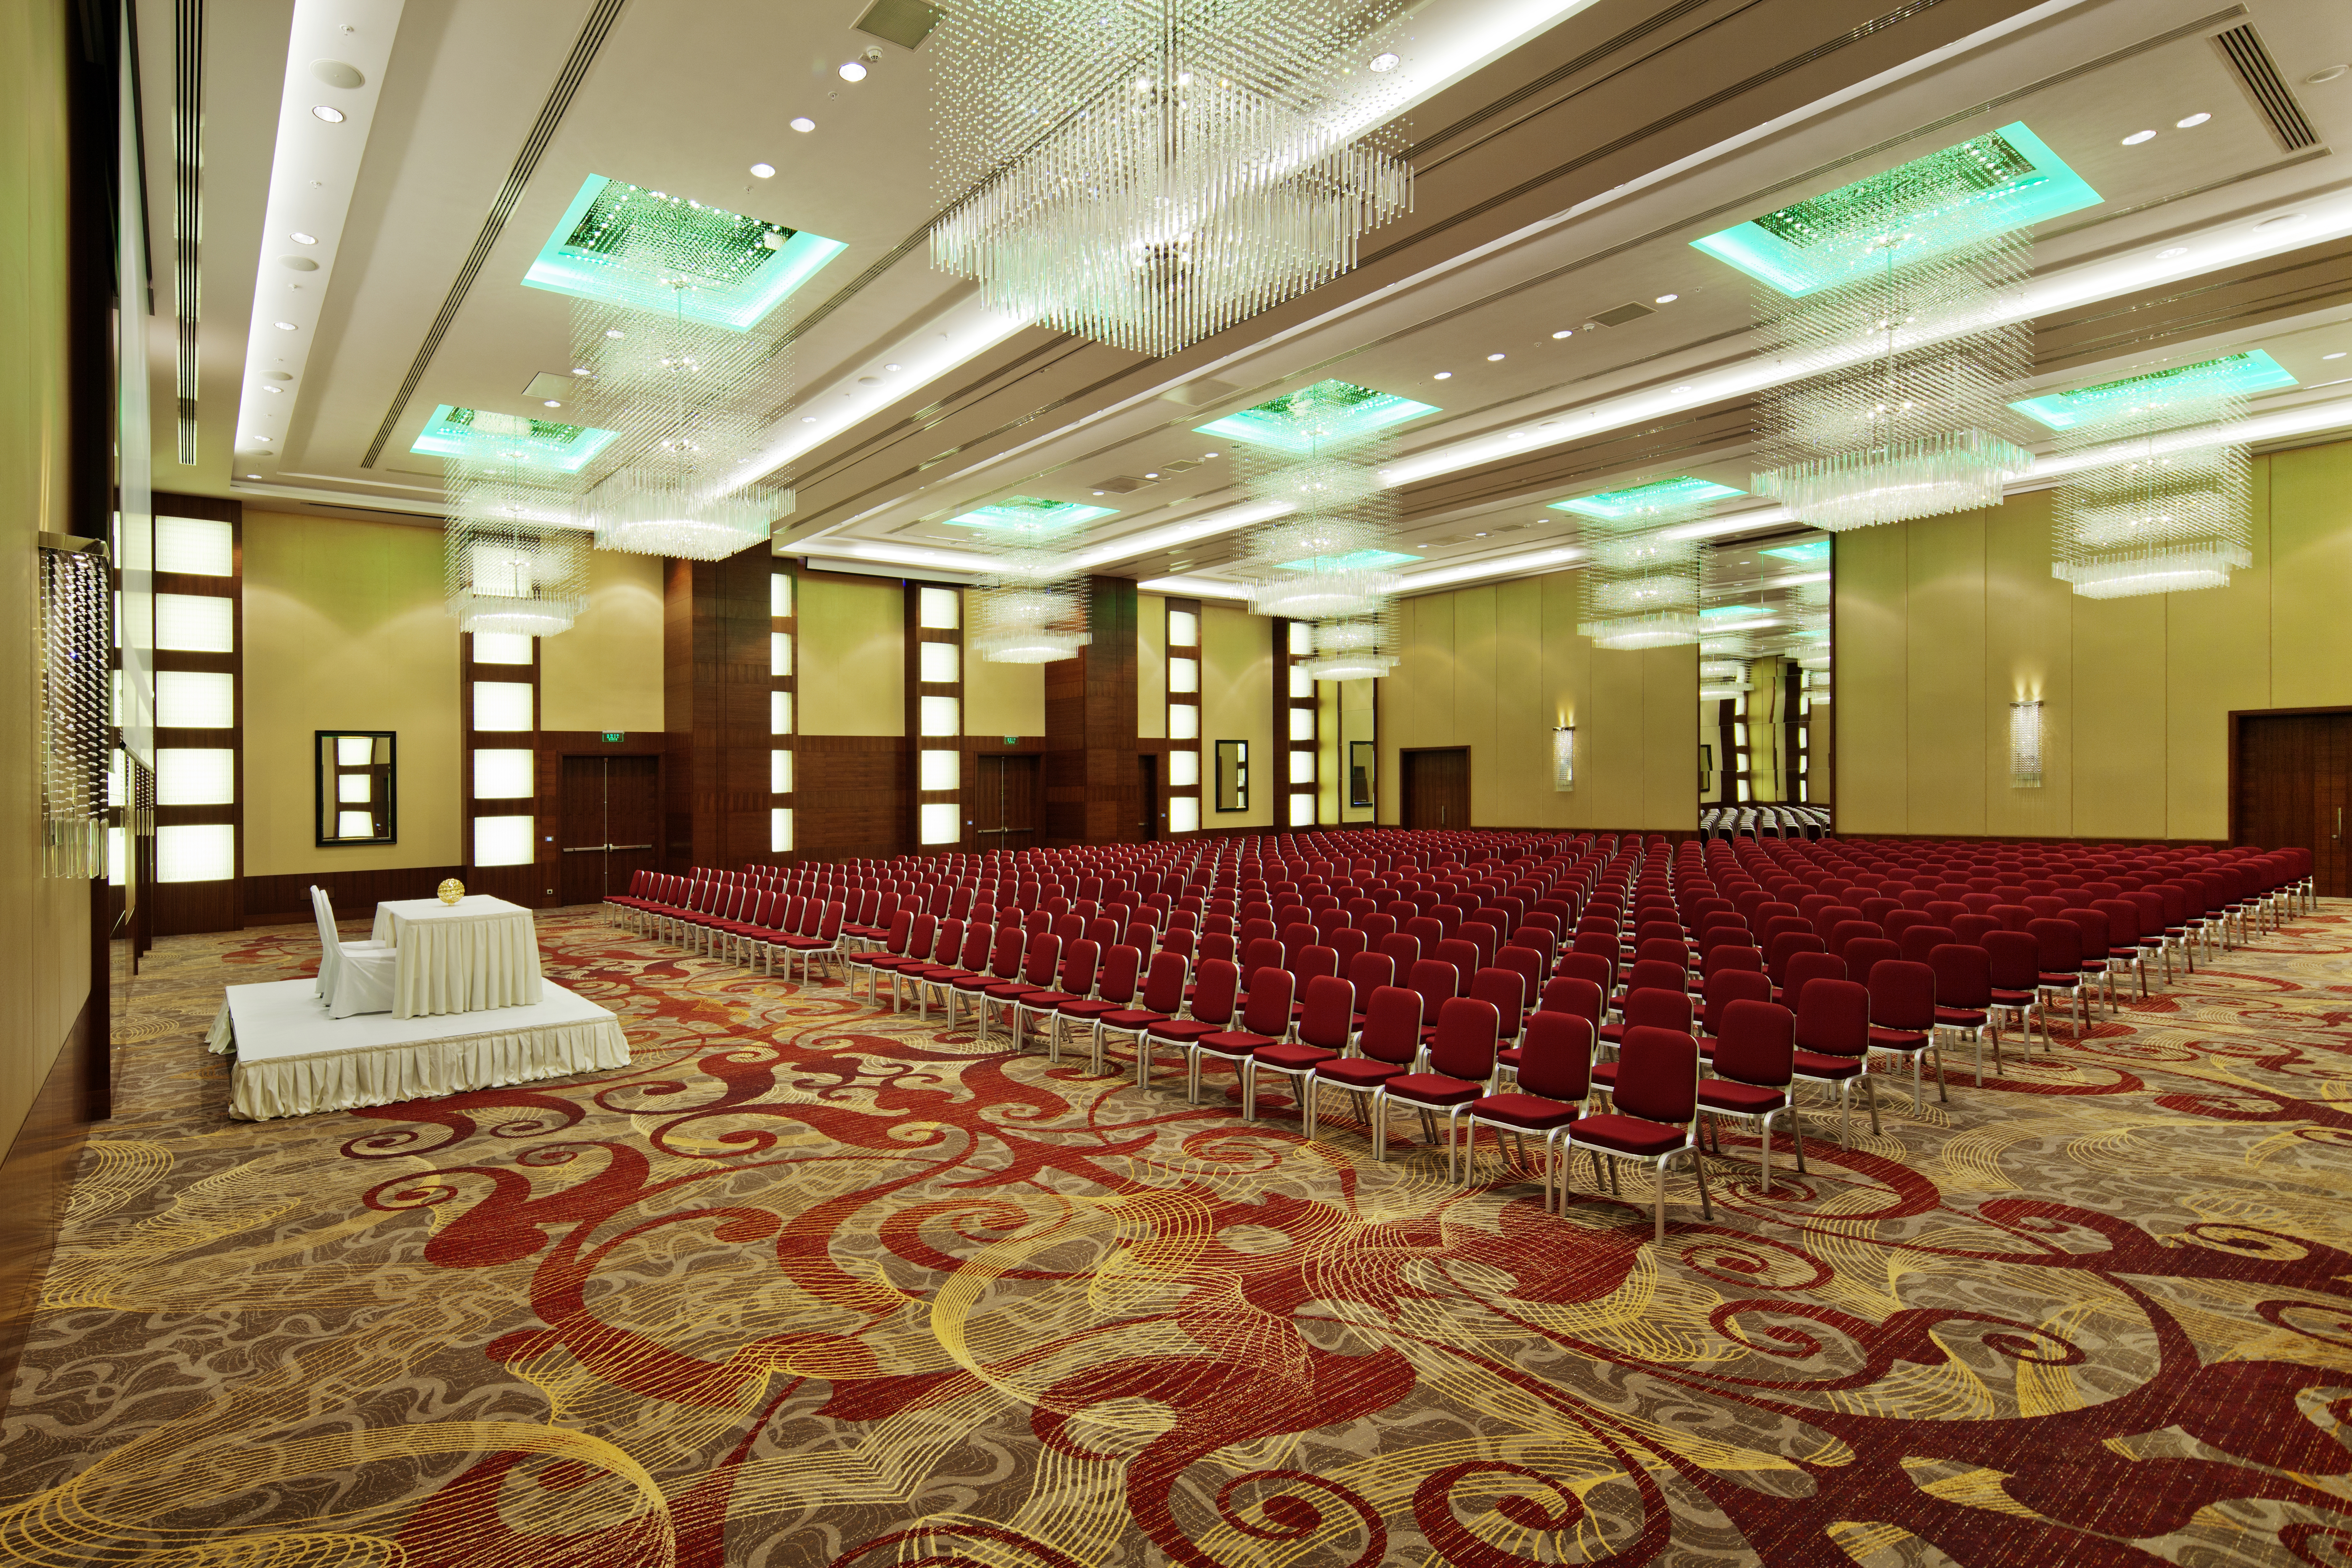 Rows of Chairs in Ballroom